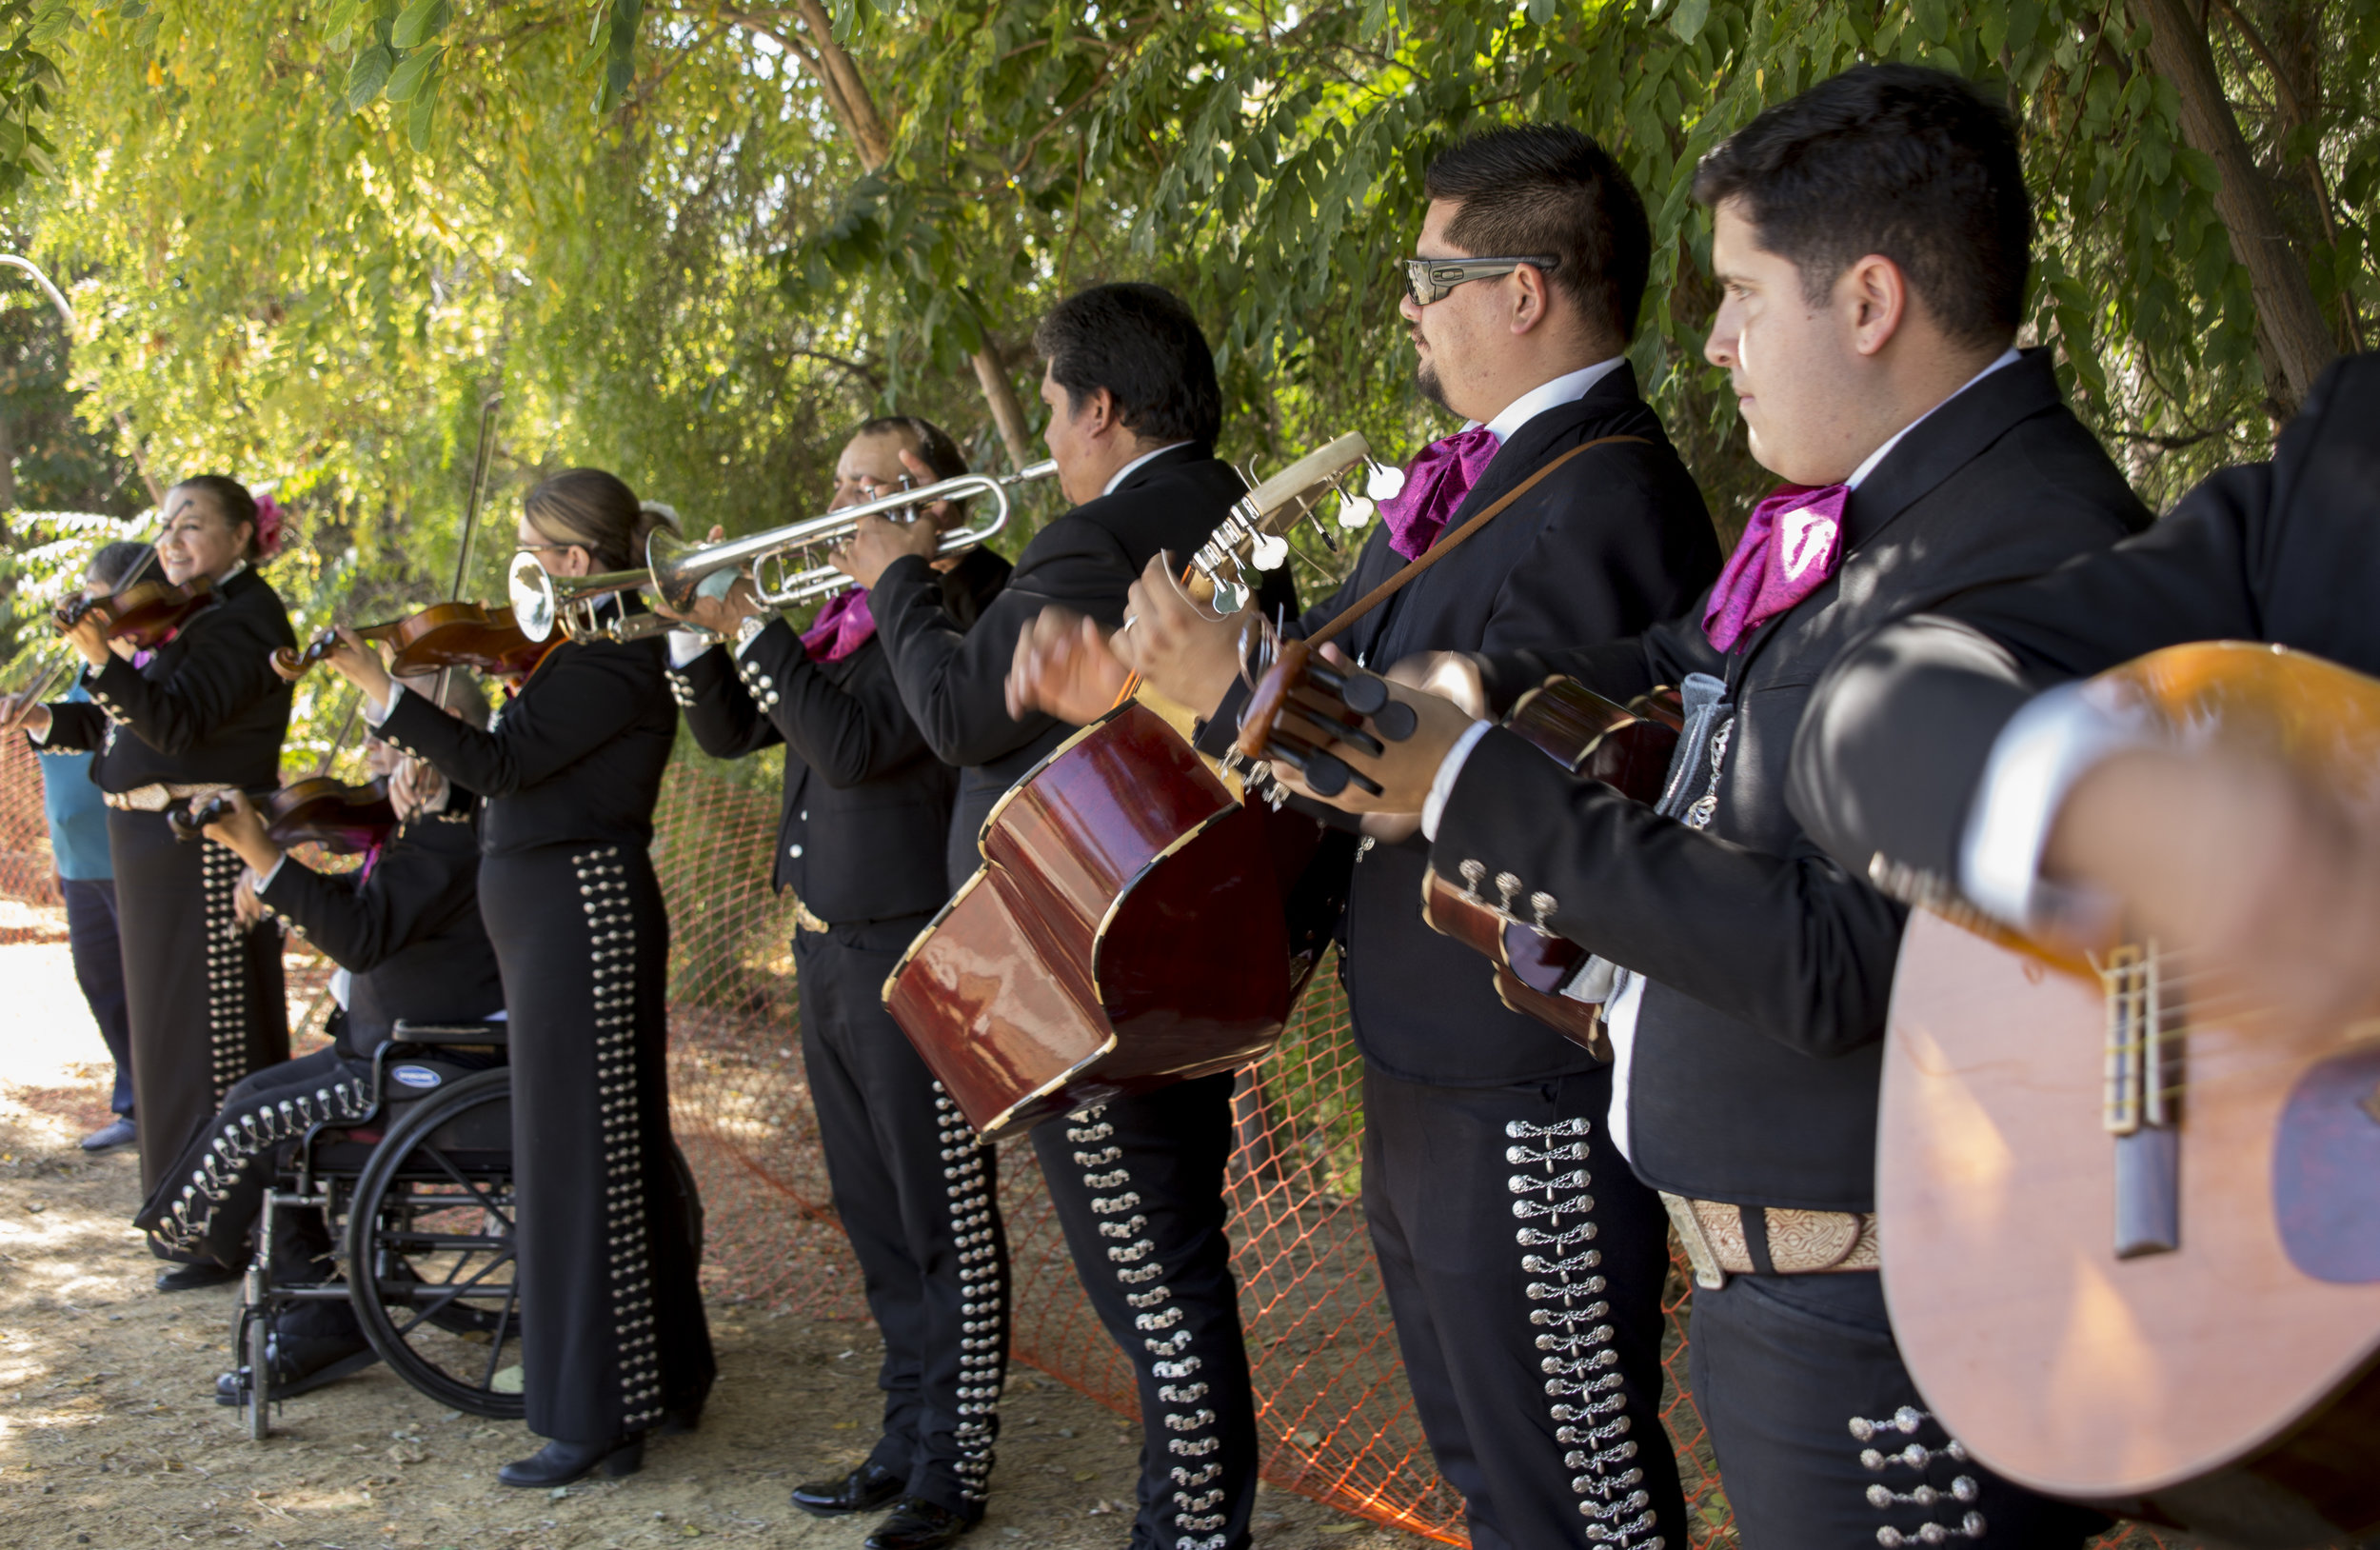  A mariachi band played during the Silicon Valley NAMI Walk  on   Saturday, September 17.  